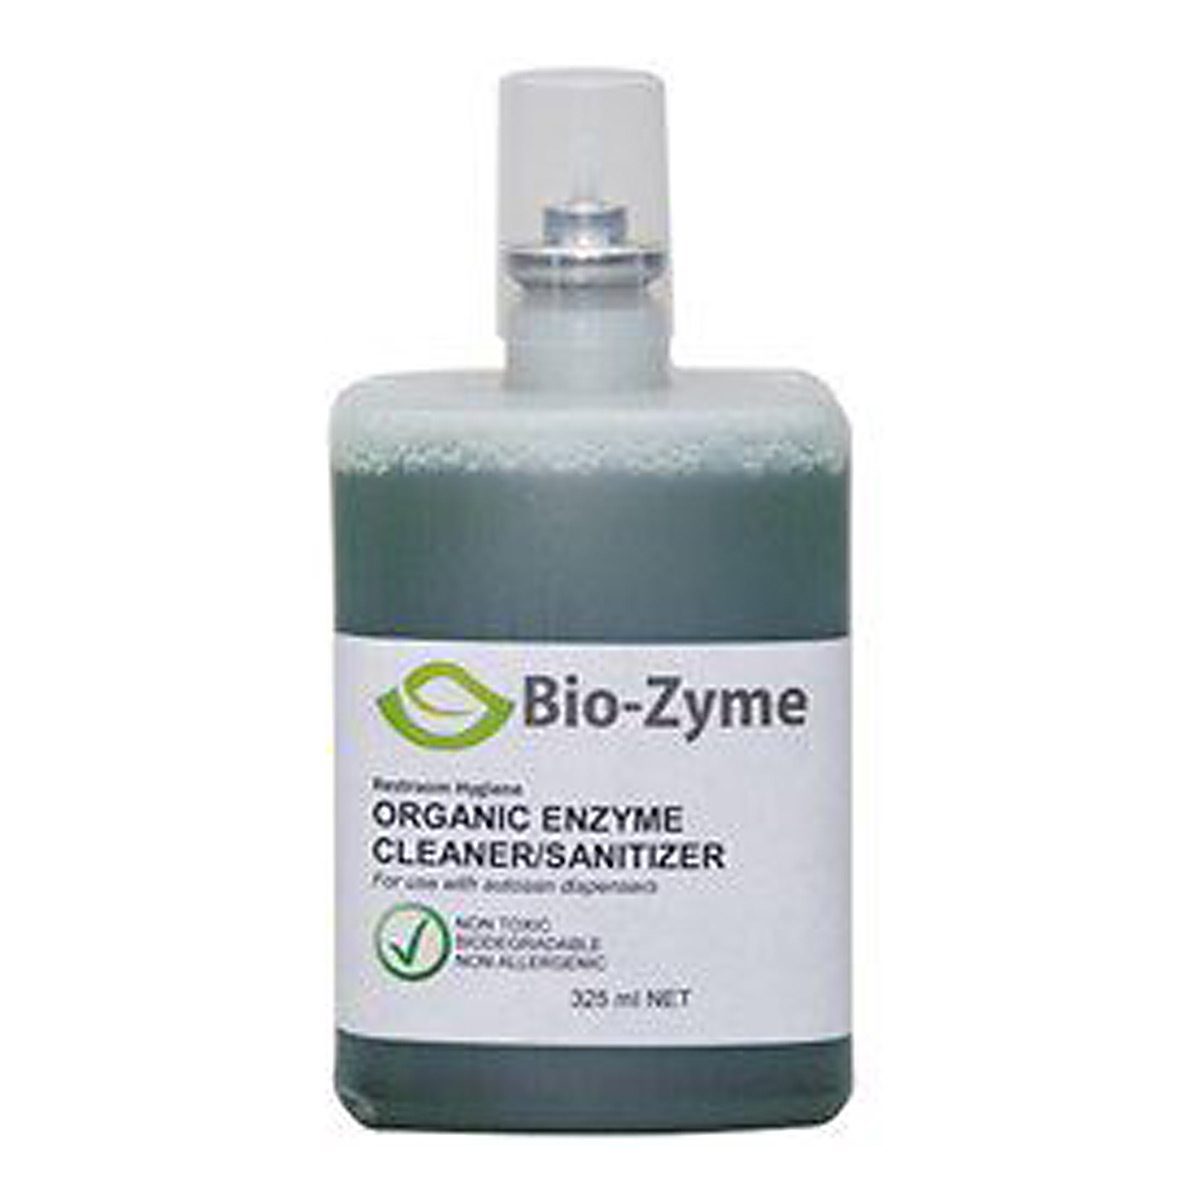 cleaning-products-washroom-bio-zyme-urinal-dispenser-refill-350ml-dispenser-to-dispense-concentrated-doses-bio-zyme-into-water-feed-source-eliminate-odour-deep-cleans-daily-vjs-distributors-SD15448